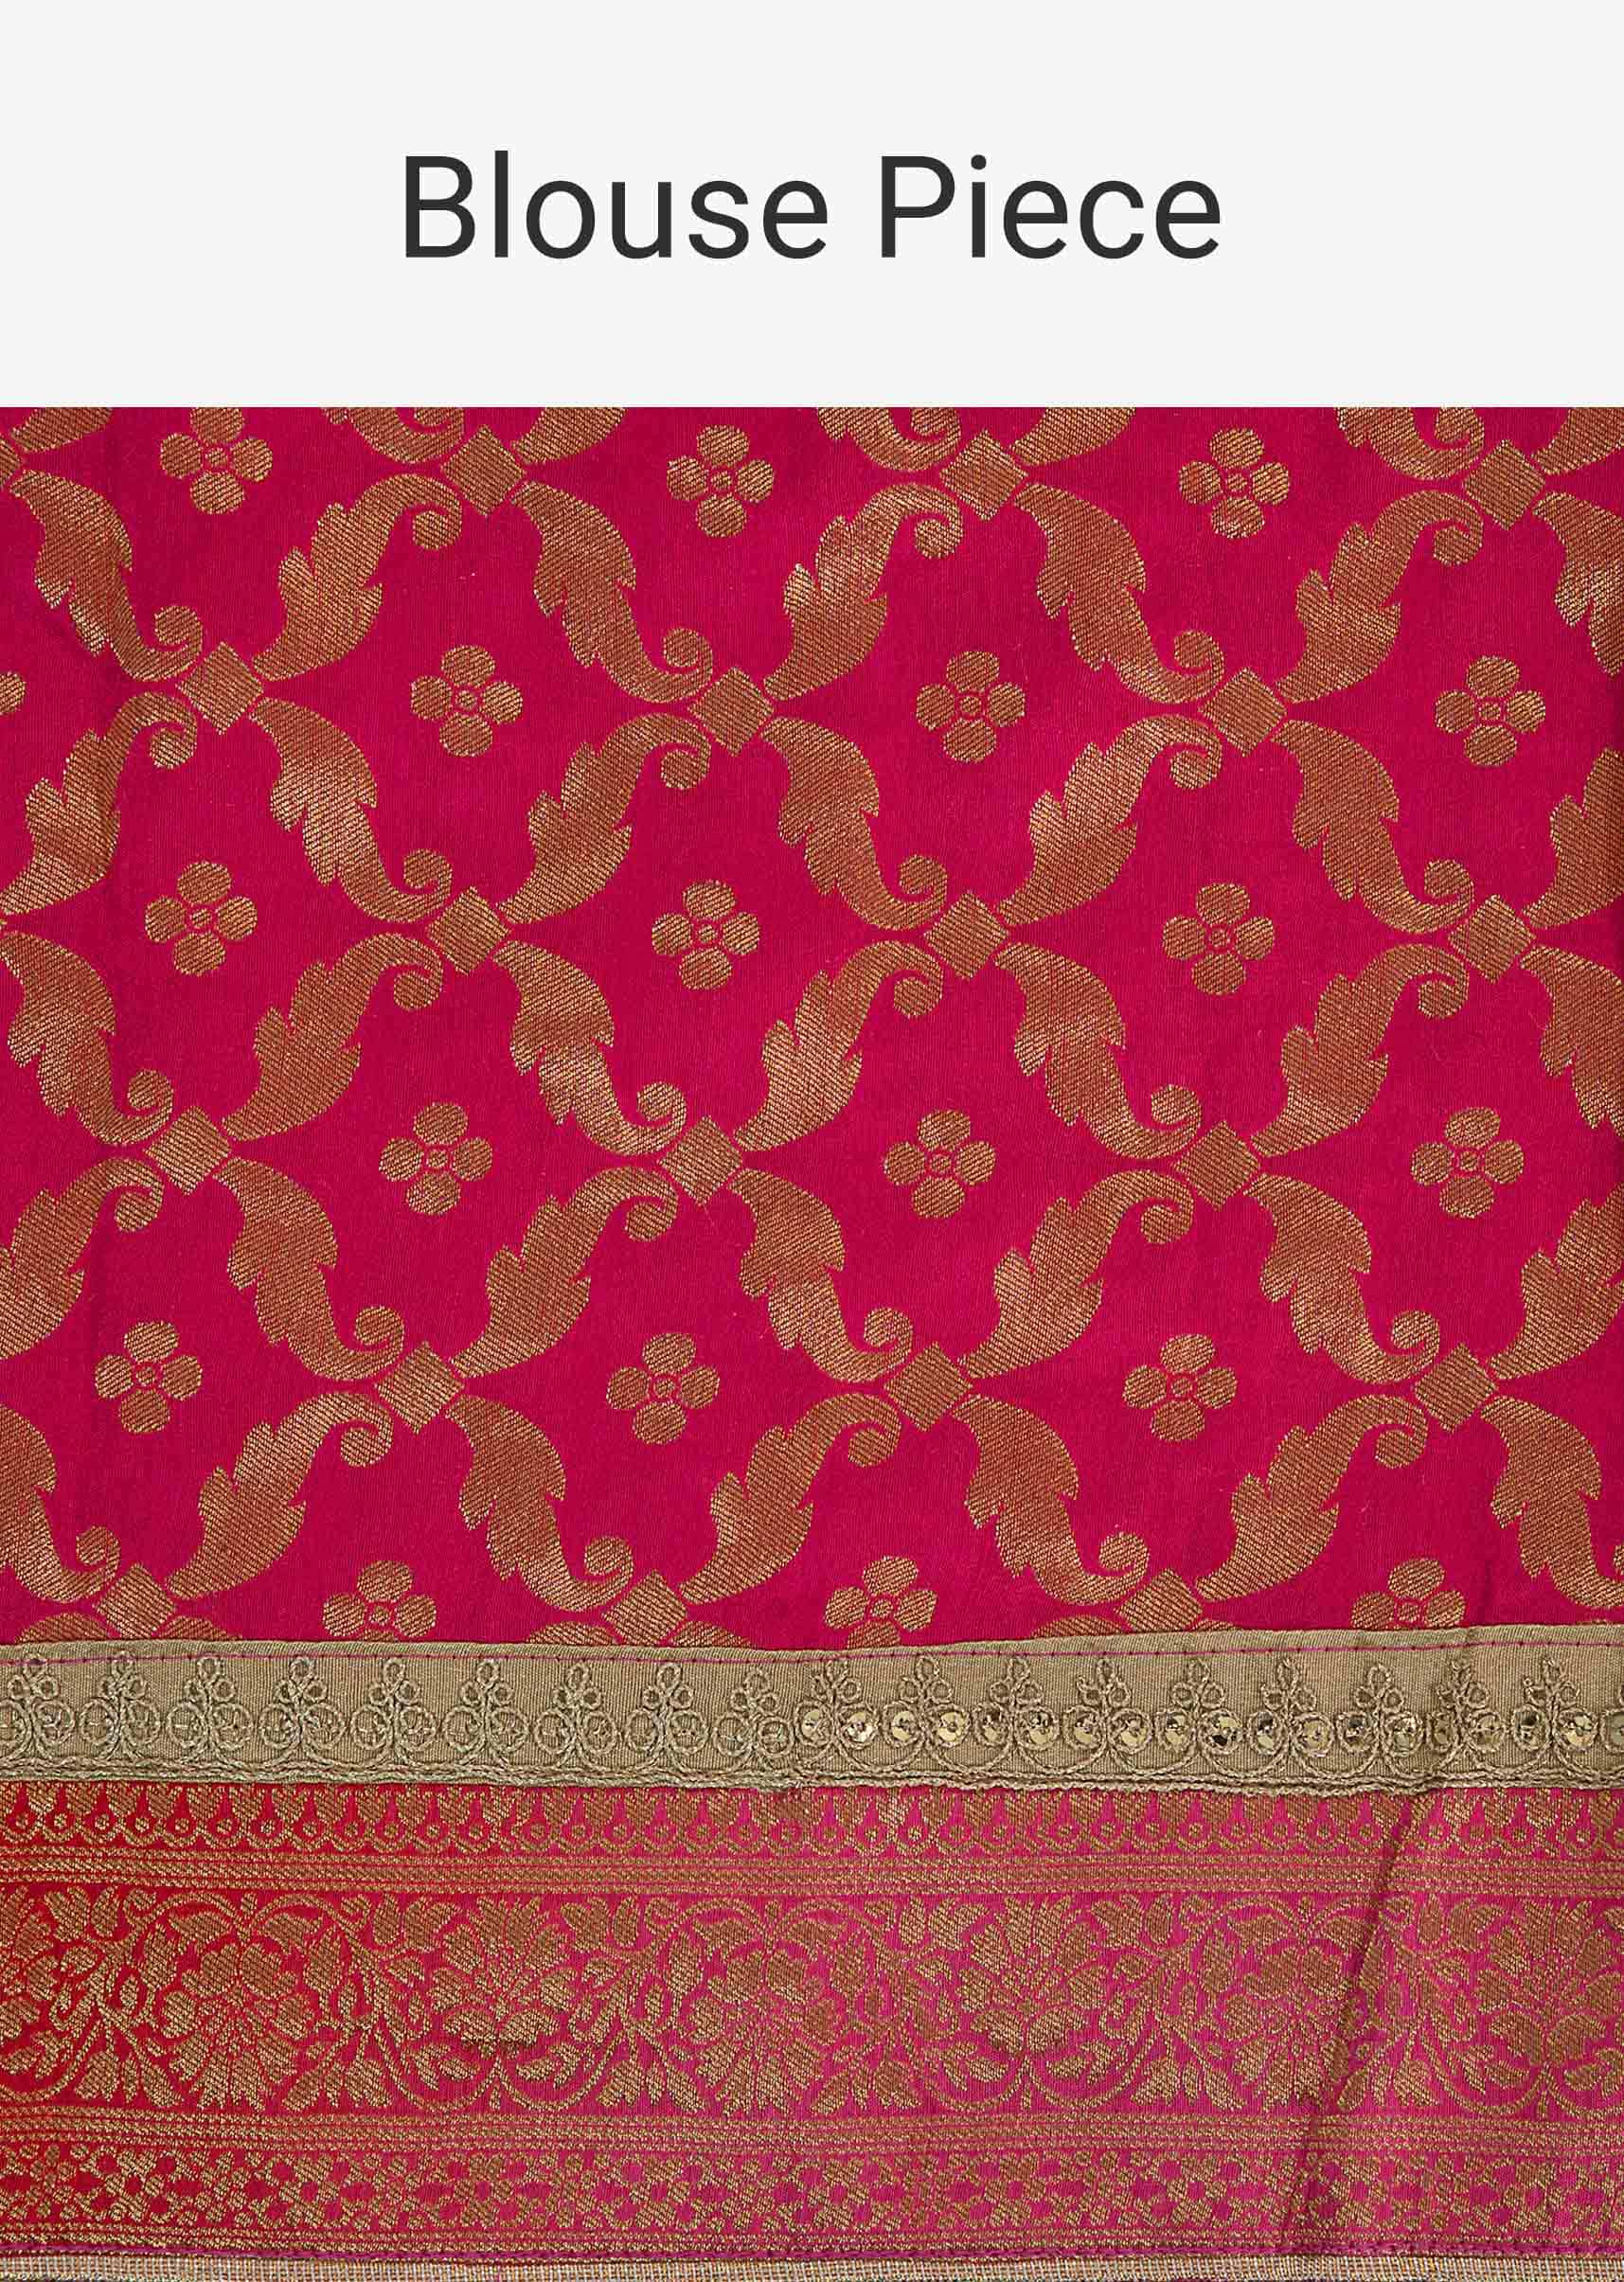 Pink leherie georgette lehenga matched with shaded brocade dupatta 